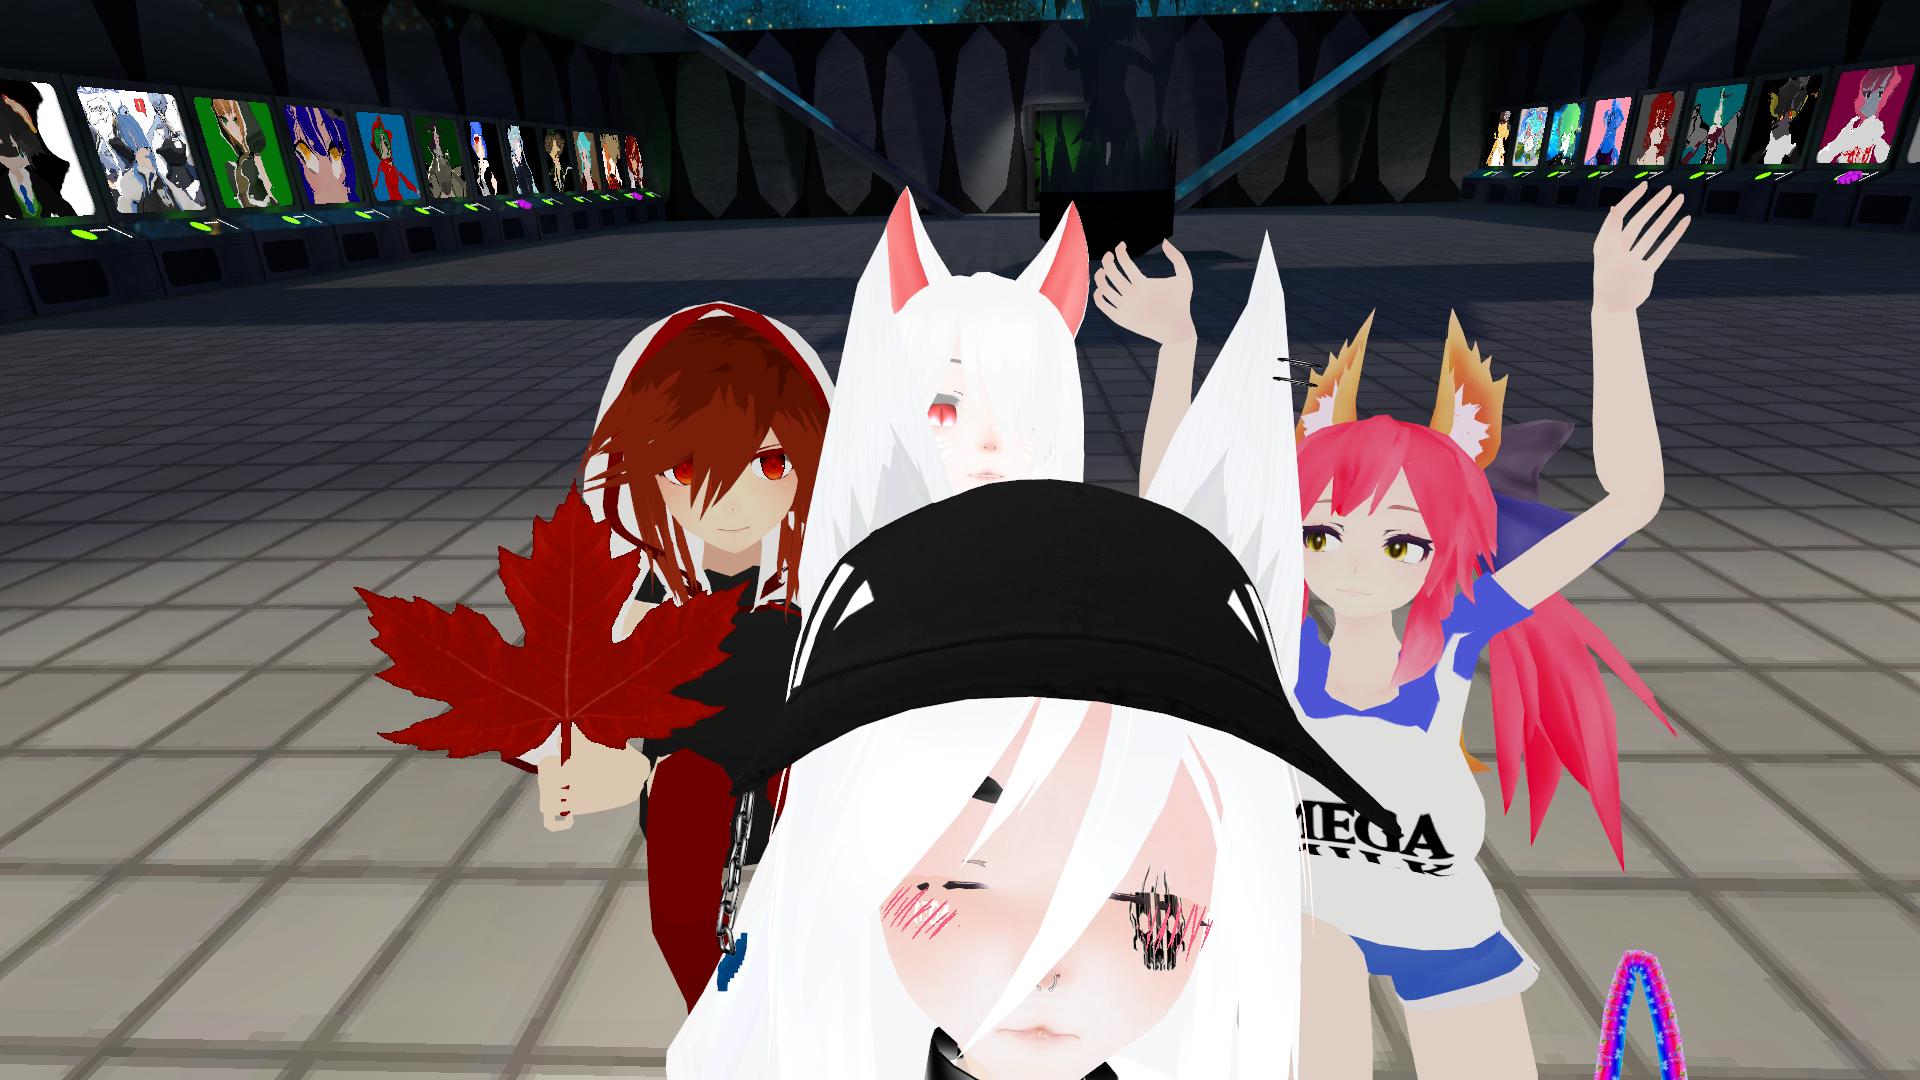 Andersonsos On Twitter So I Was With Couple Drunkass On Vrchat Trying Out Some Avatars And The Song Of Ricardo Milos Meme Is Liu Step Ahead Feat Vano Remix Https T Co Bsw4dys3jz